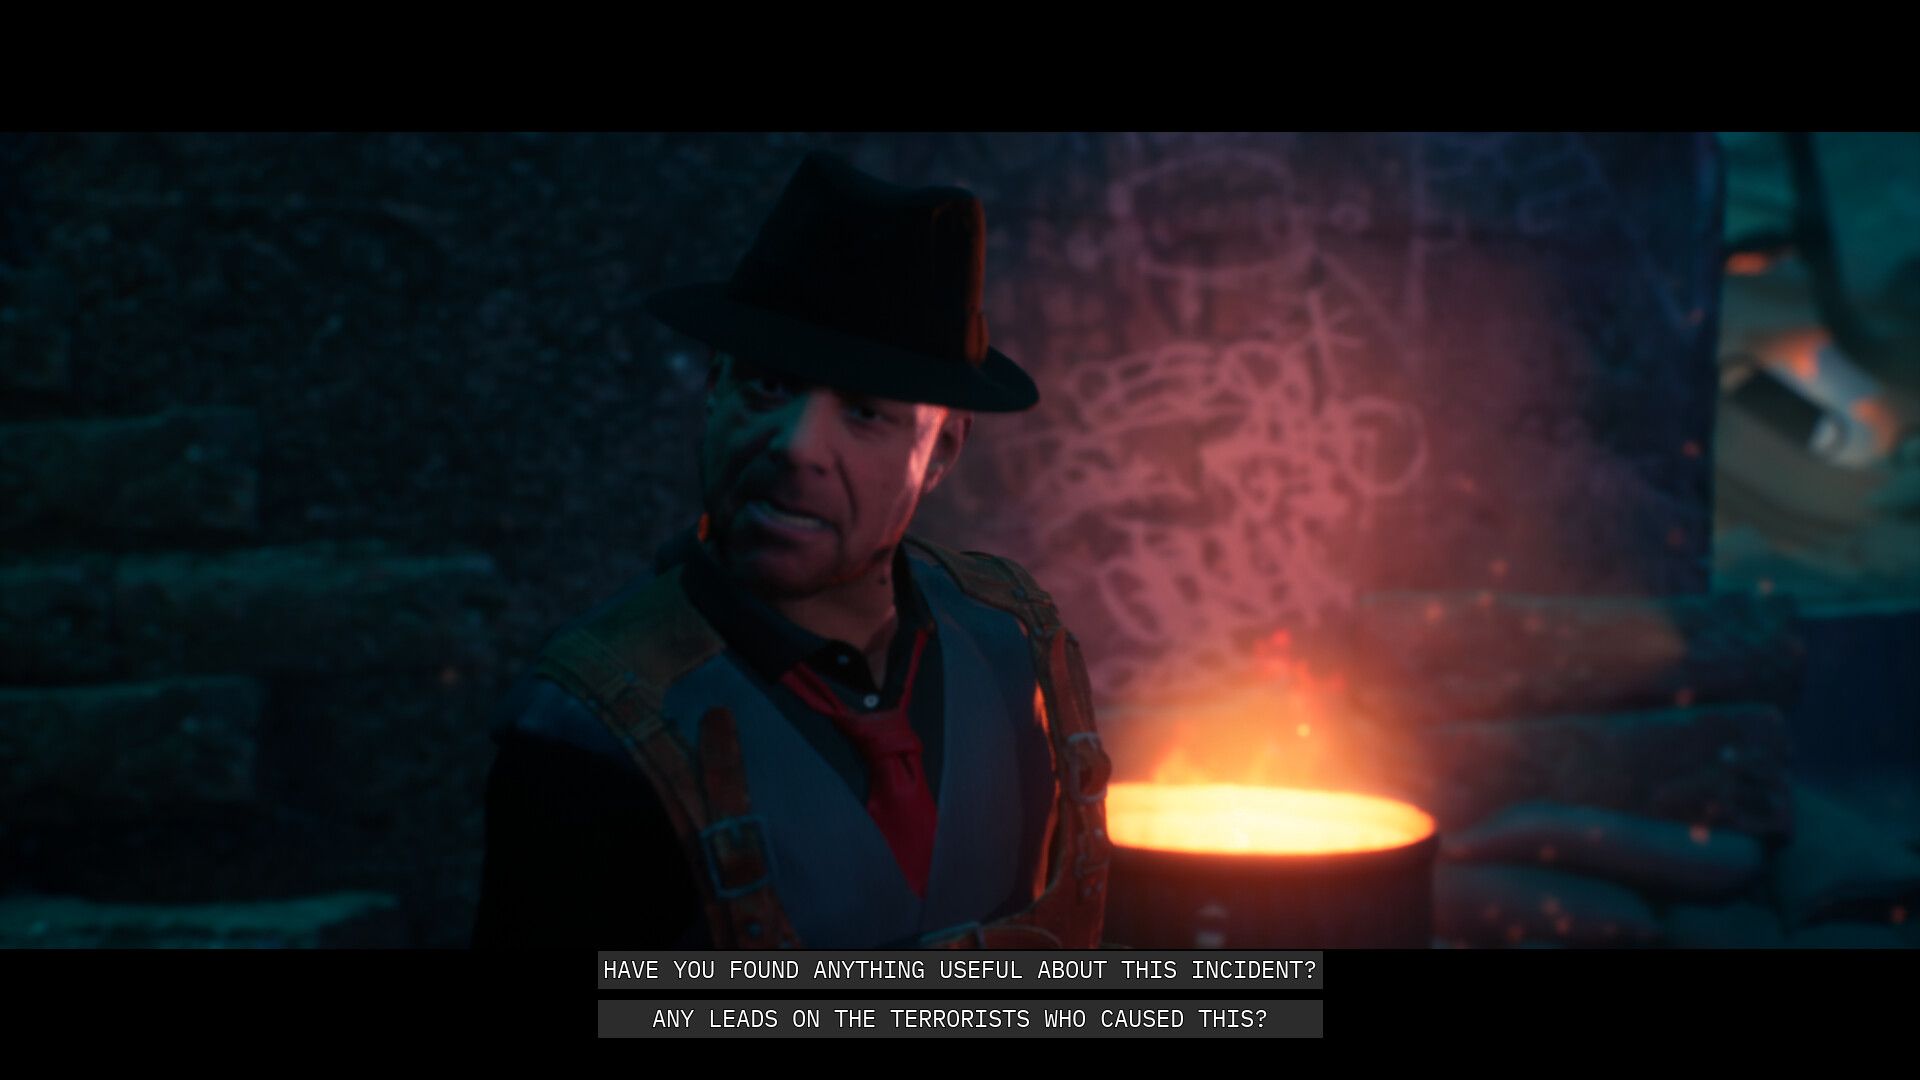 Video game screenshot of a man in a fedora. Subtitles show him asking about whether the player has found the terrorists responsible for an explosion.